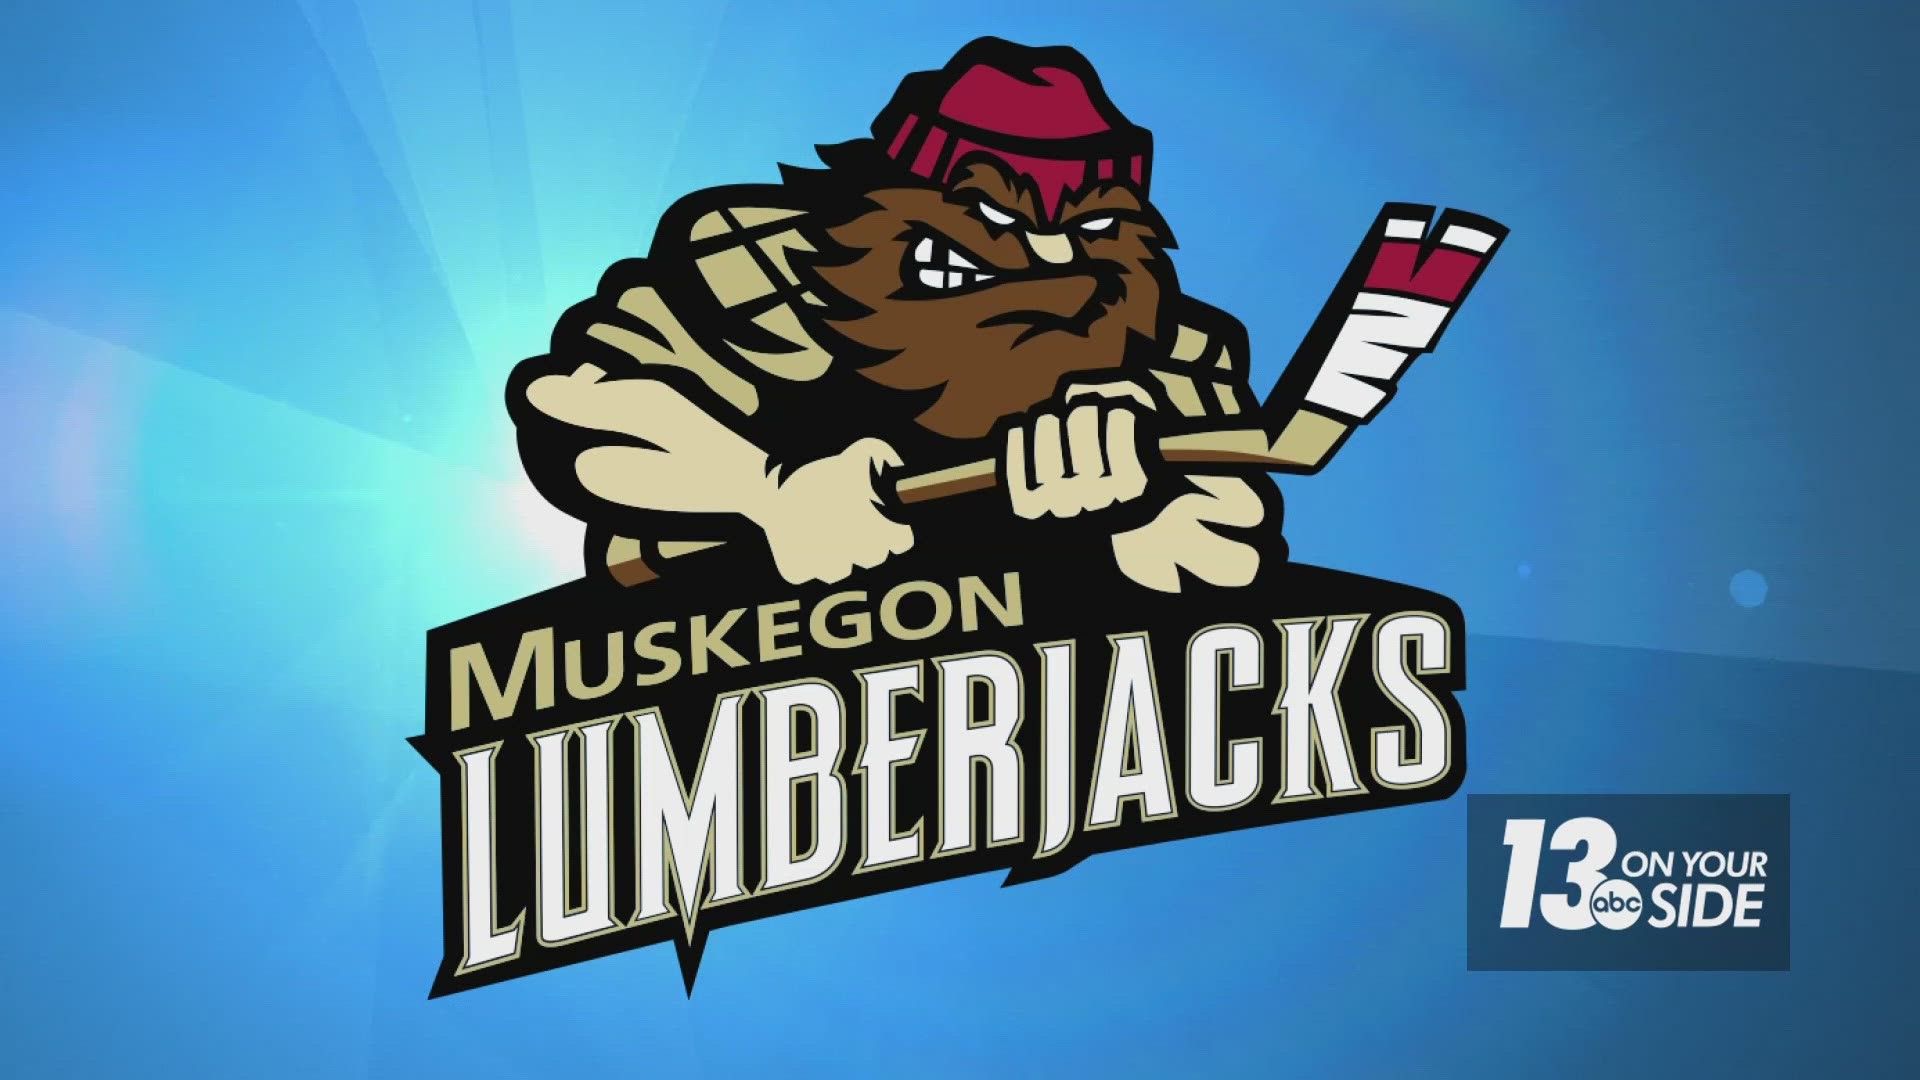 The Muskegon Lumberjacks are finishing up a successful regular season, with the playoffs on the horizon.